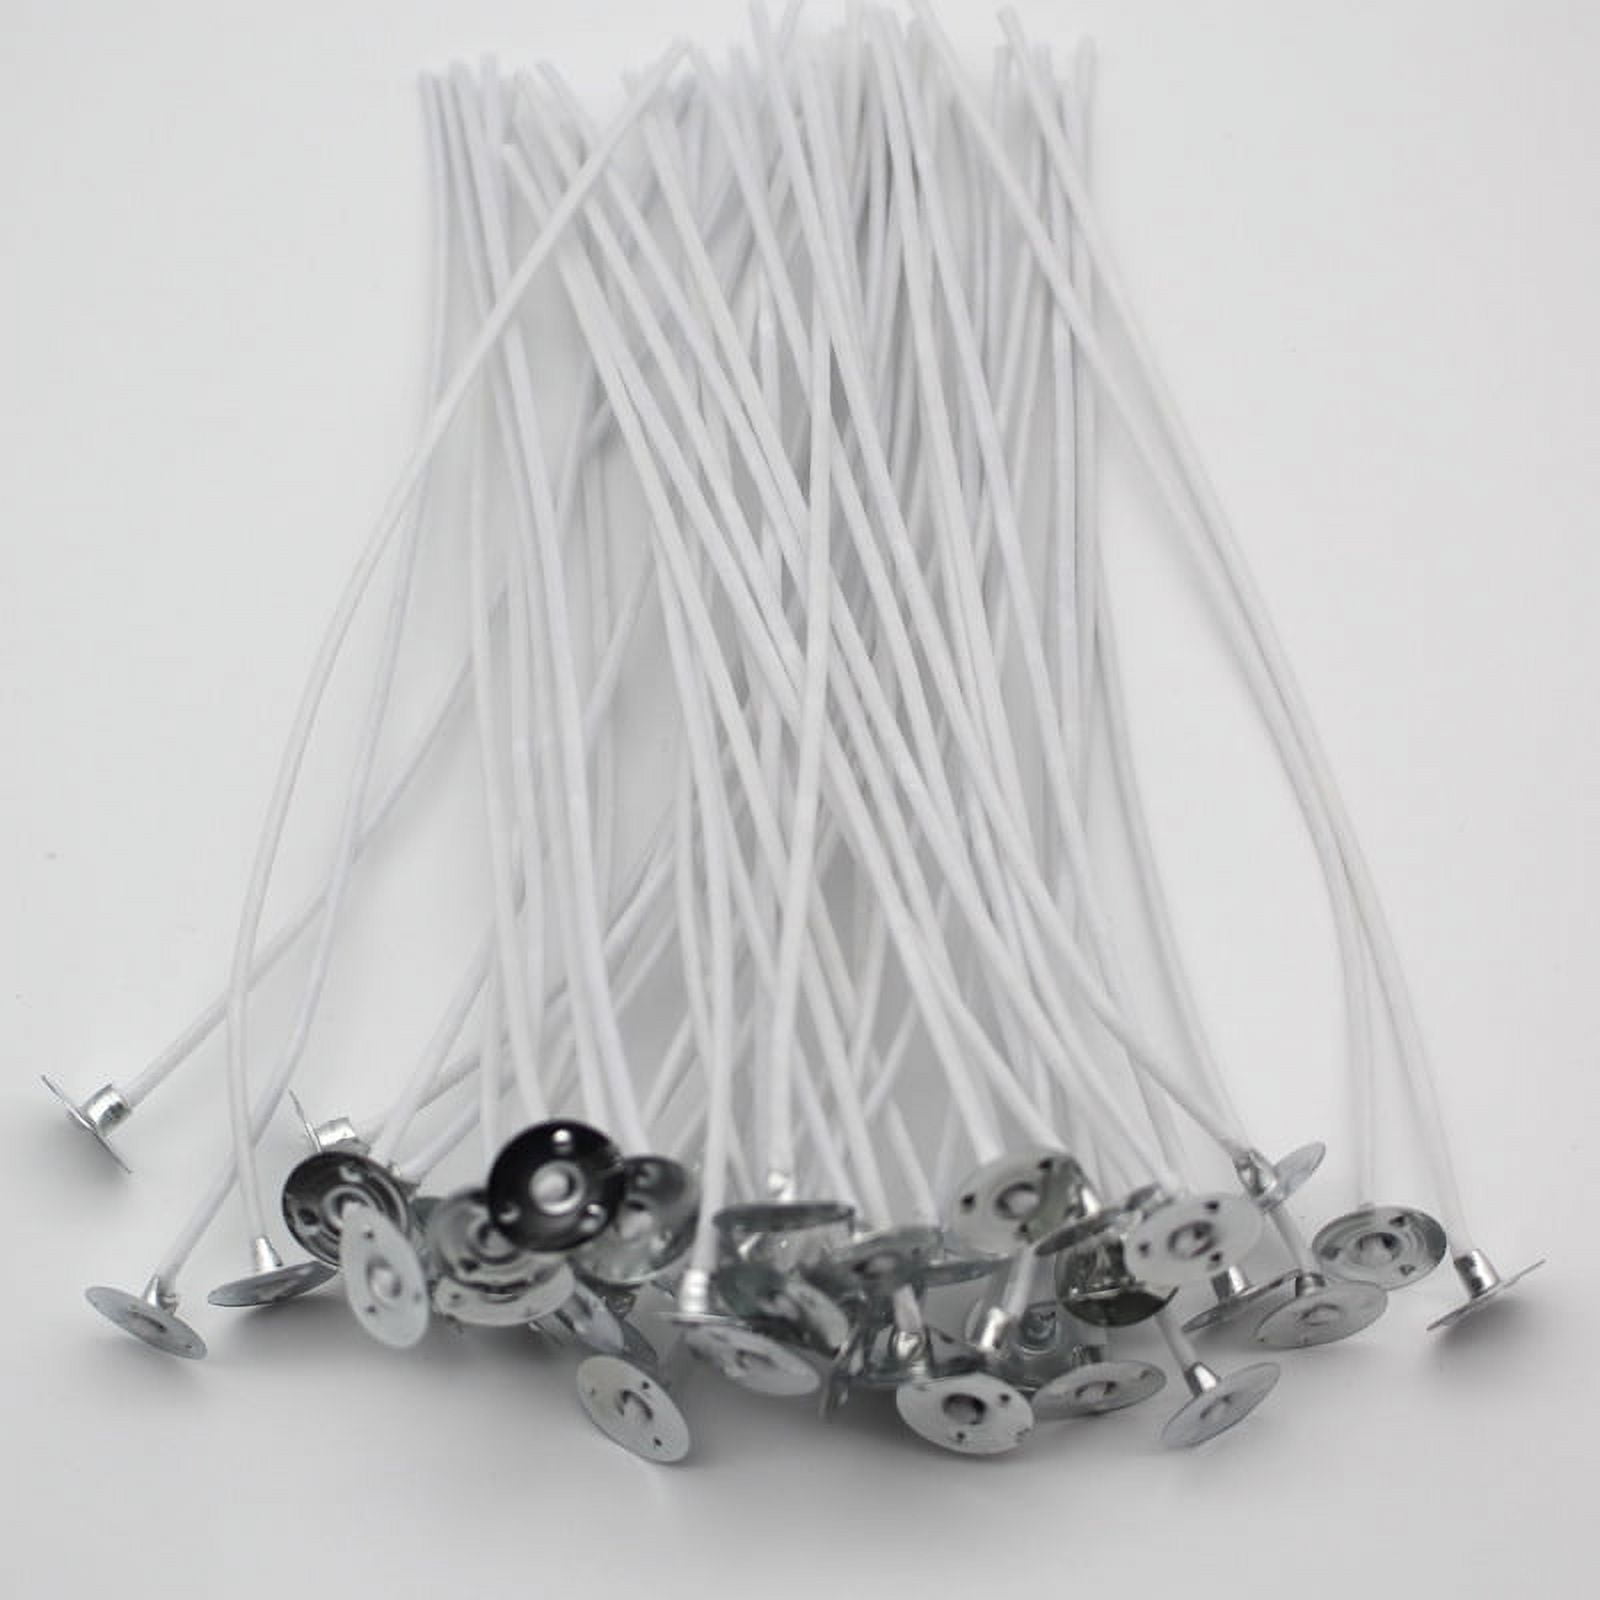 MILIVIXAY 100pcs 6.0inch ECO 10 Wicks for Soy Candles ,Pre-Waxed and Tabbed  ECO Wicks for Soy Candles Making. 